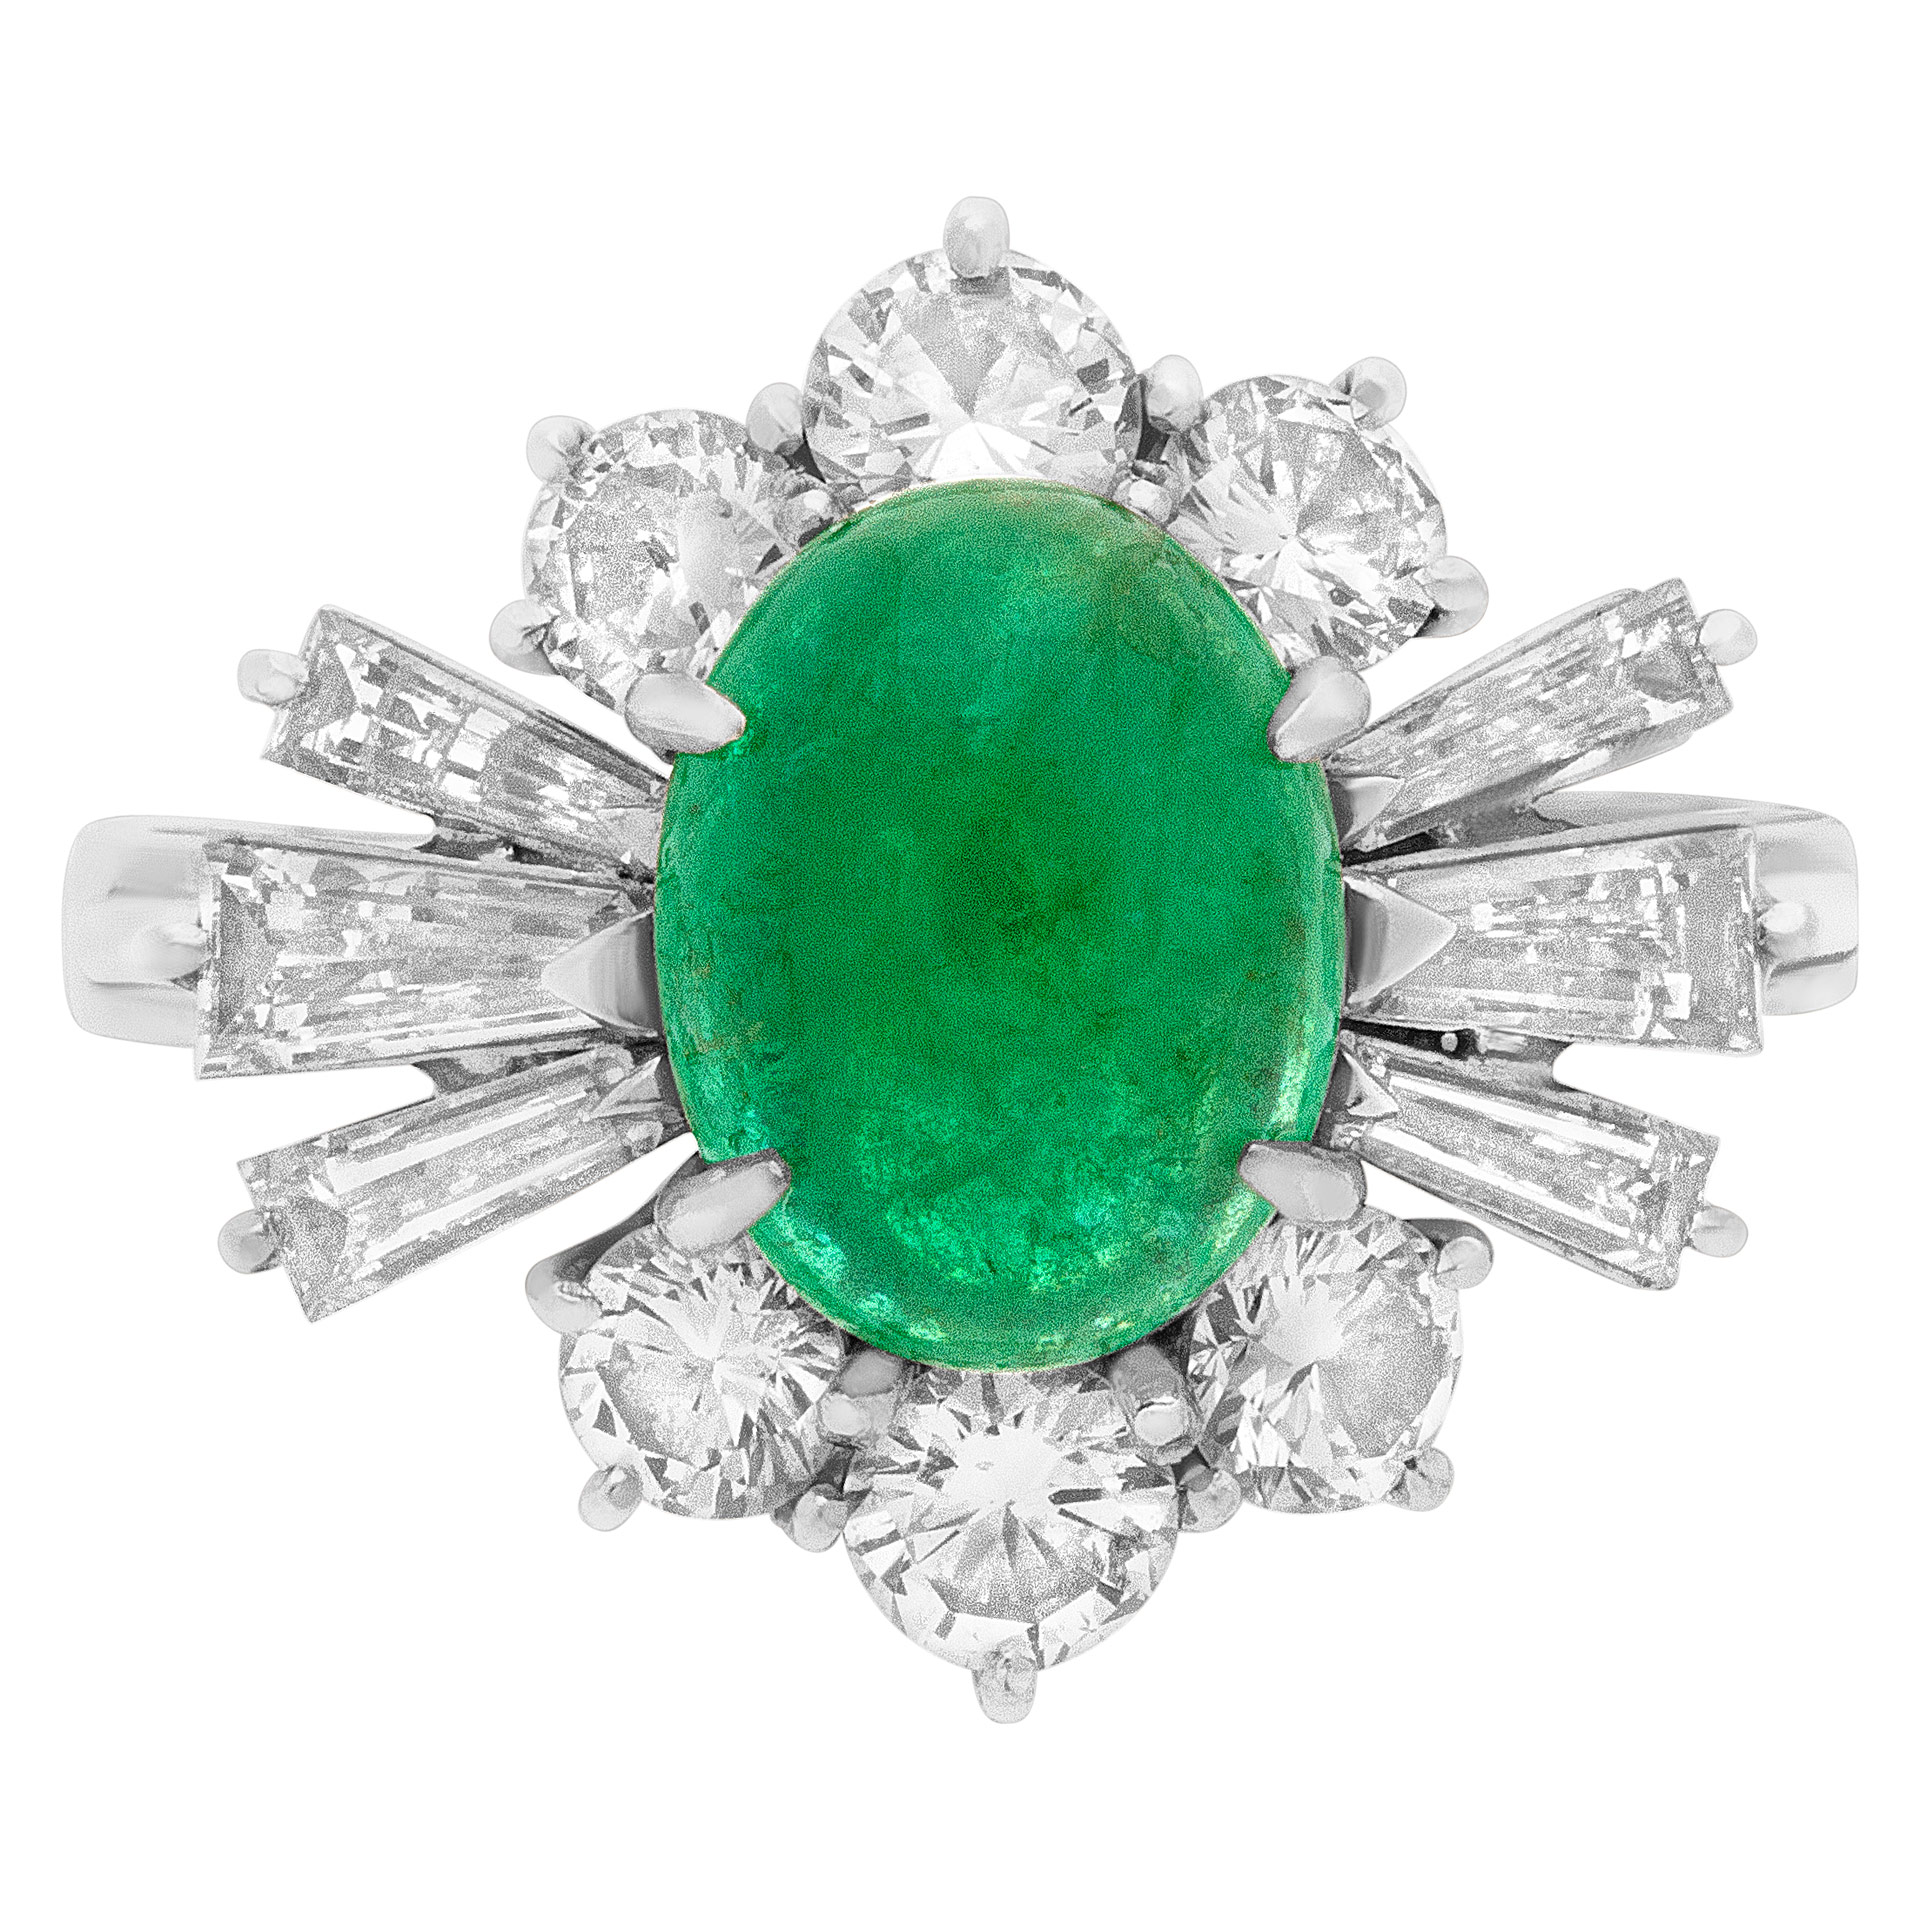 Cabochon emerald and diamond ring in 18K white gold